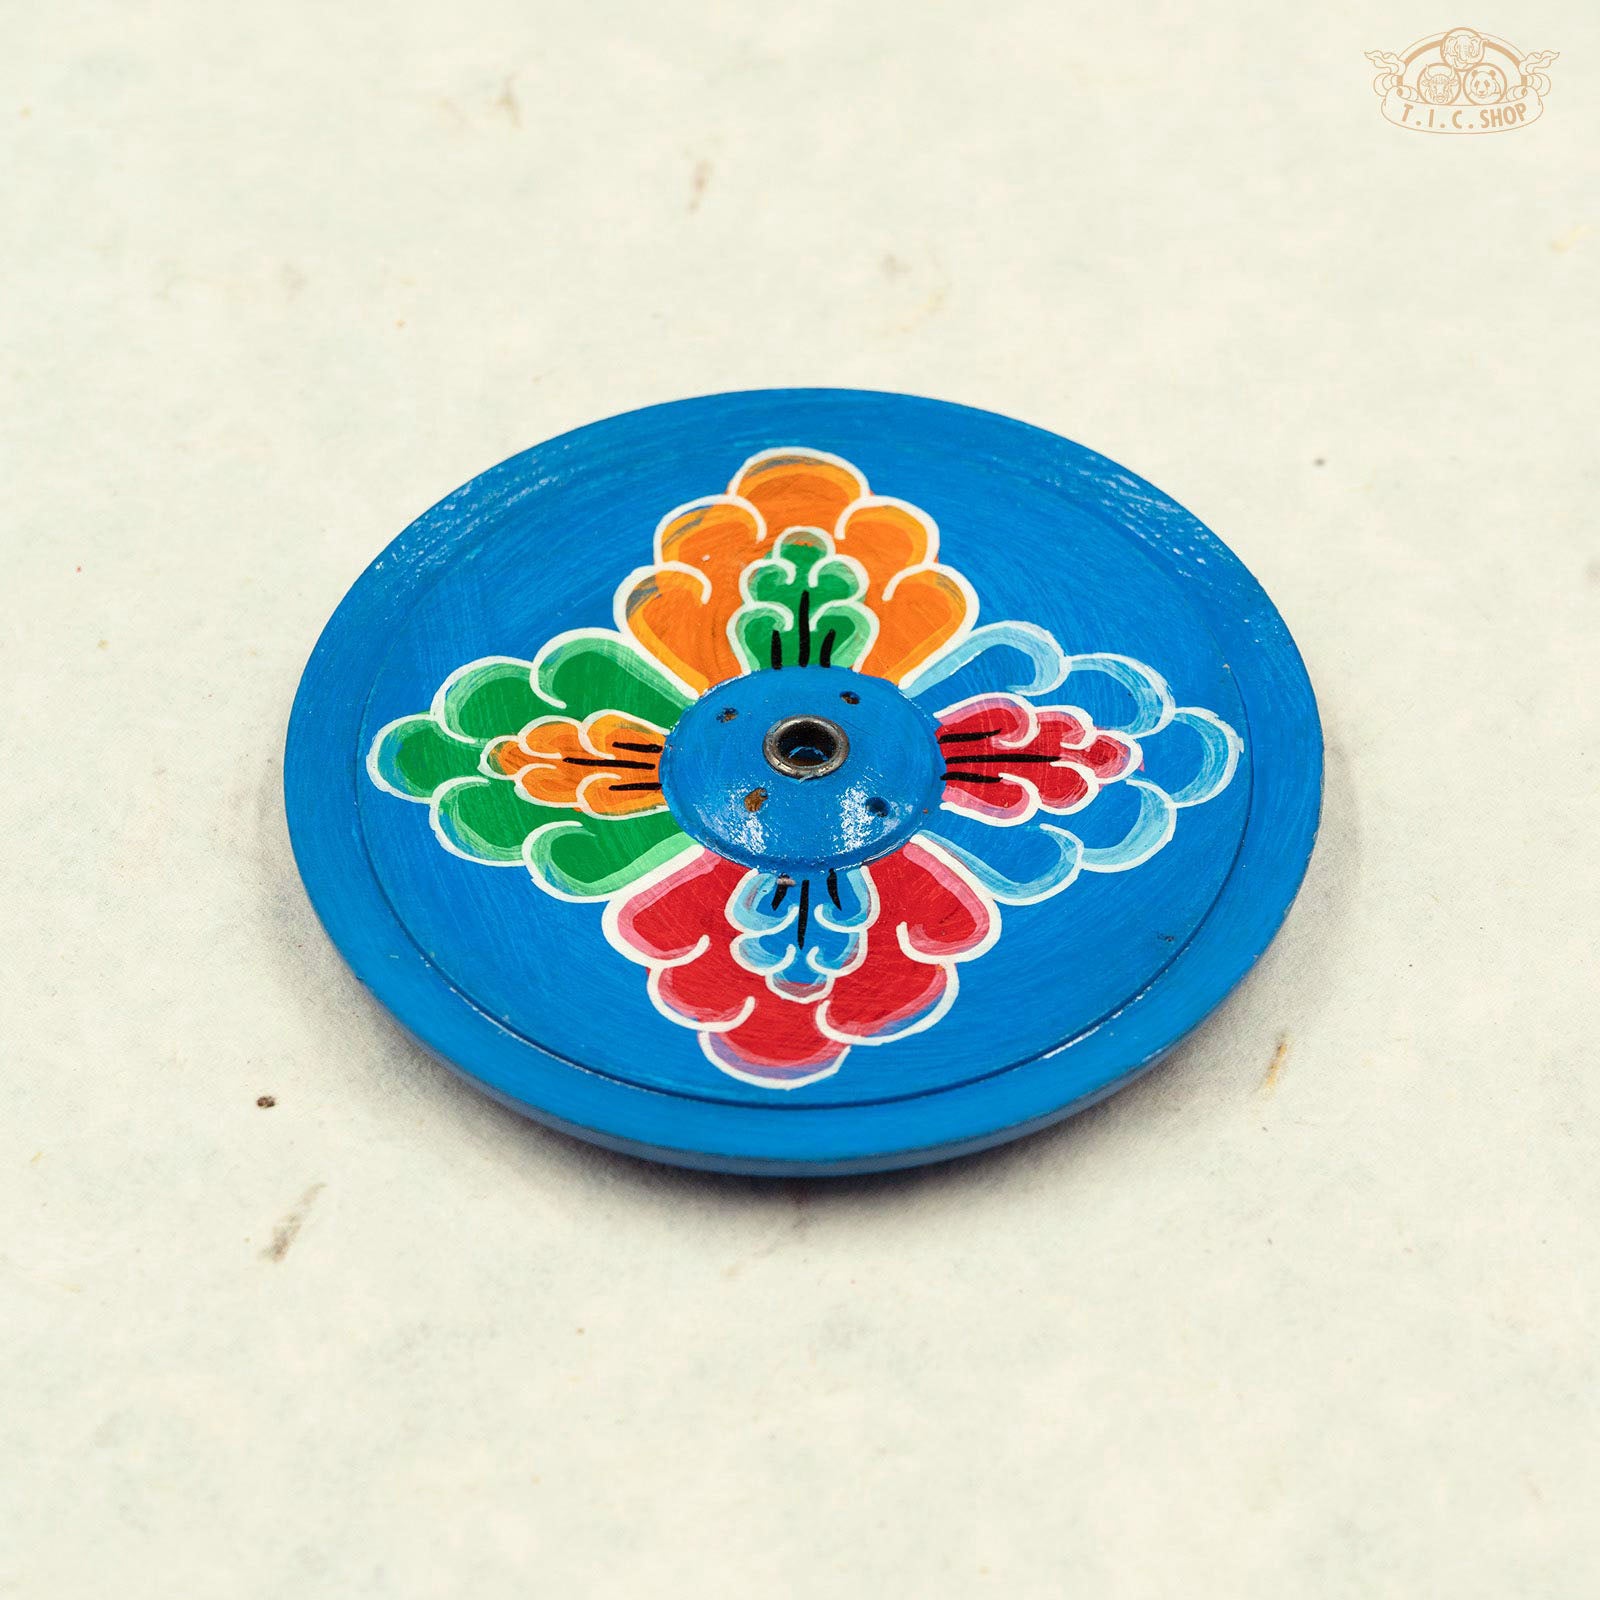 Lotus Flower Hand-painted Wooden Plate Incense Holder